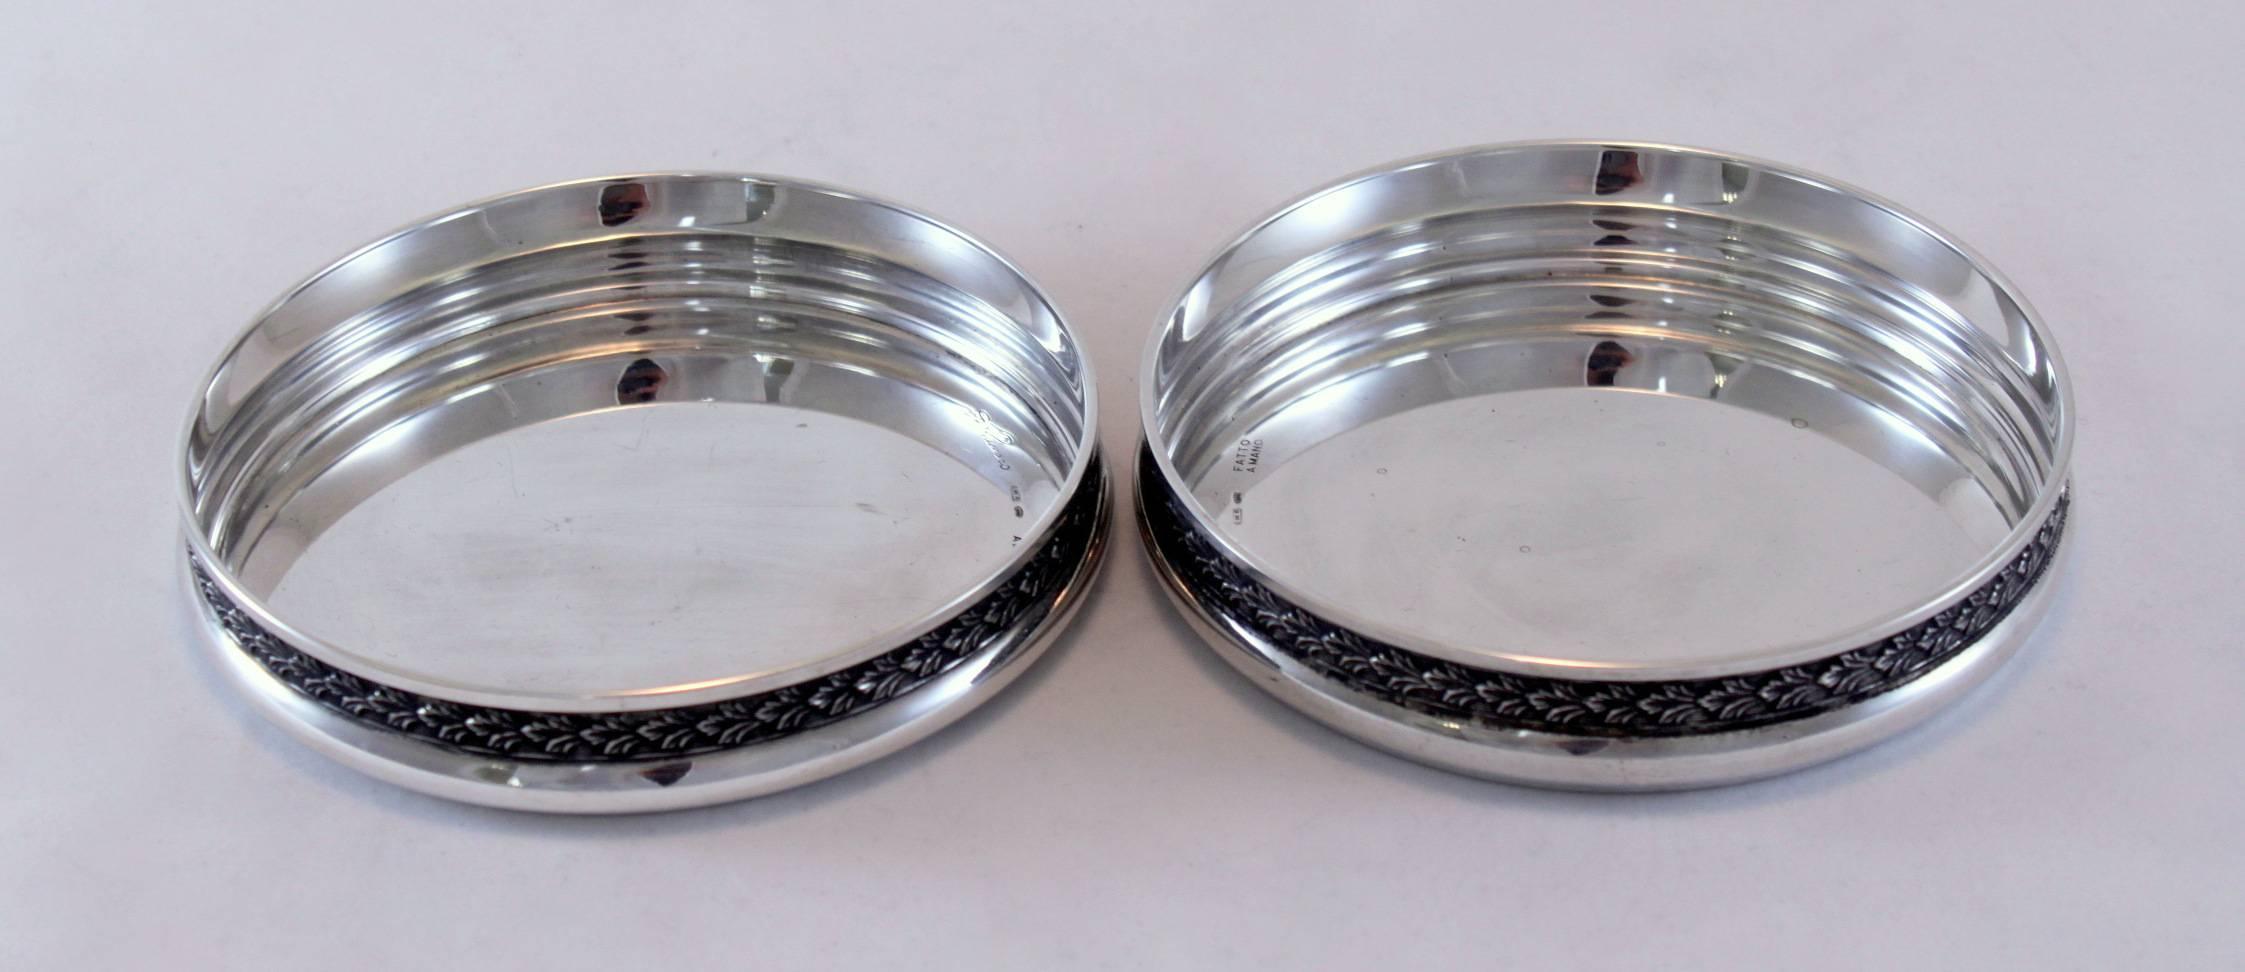 Pair of silver wine coasters
By Fatto Amano
Italy, circa 1900
800/1000
Fully hallmarked.

Approximate dimensions: 
Diameter x height 11.8 x 2.1 cm
Total weight: 206 grams

Condition: Minor wear and tear from general usage, some micro